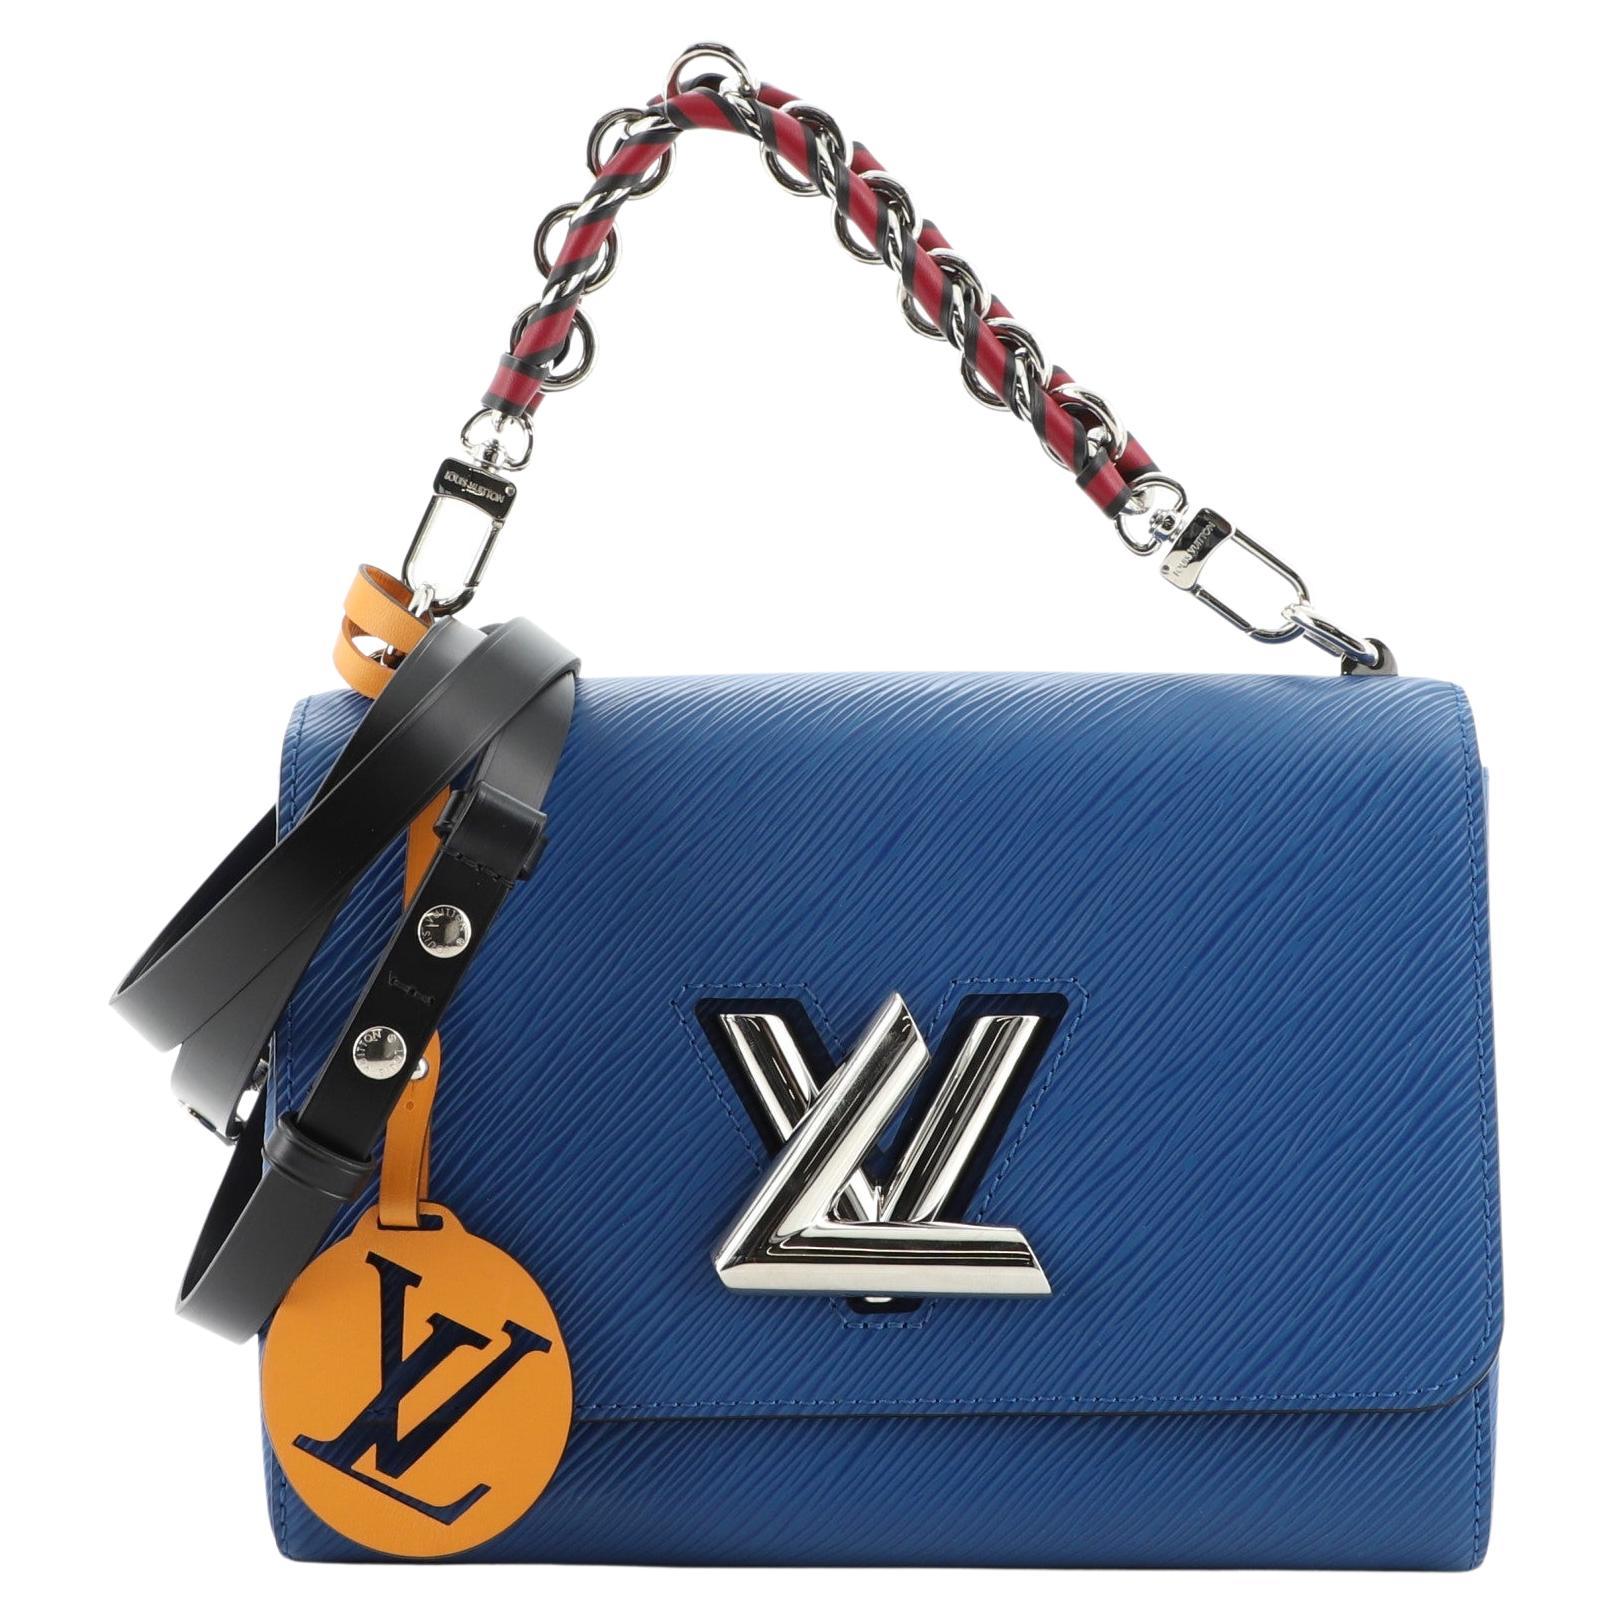 Louis Vuitton Cruise 2019 Bags With Braided Handles  Spotted Fashion